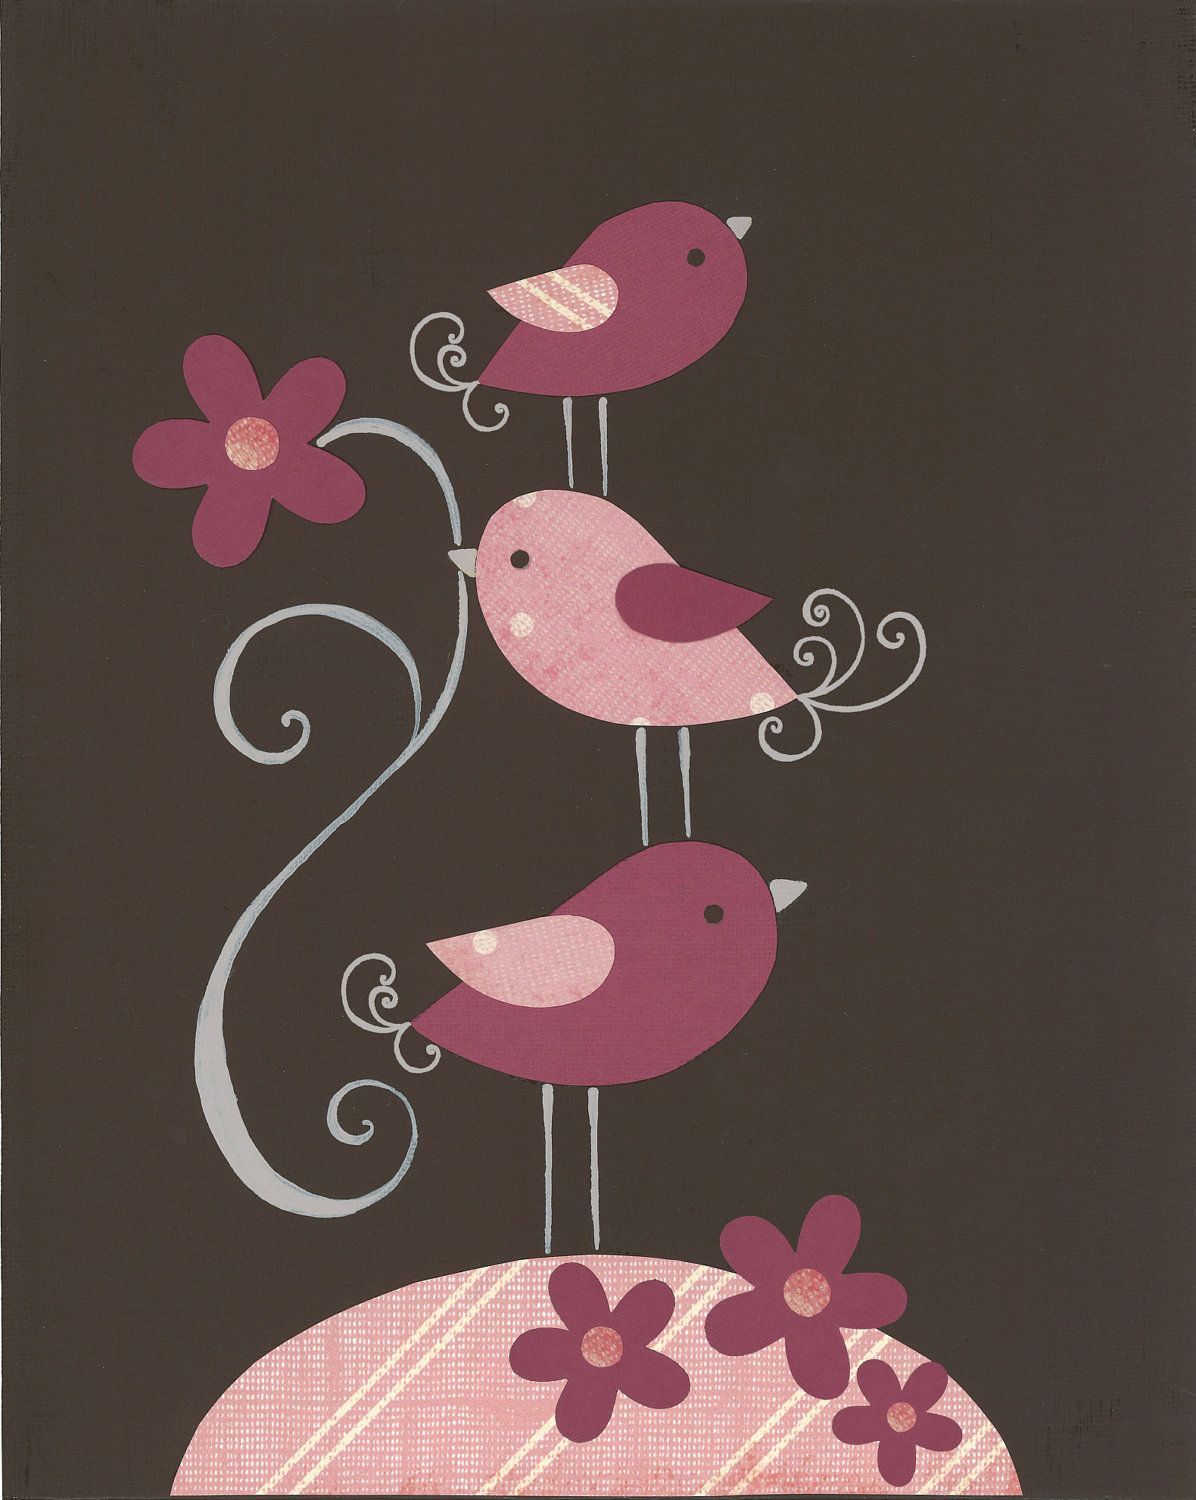 This Whole Pink And Brown Bird/owl/birdhouse/flower Thing Is Cool (View 16 of 20)